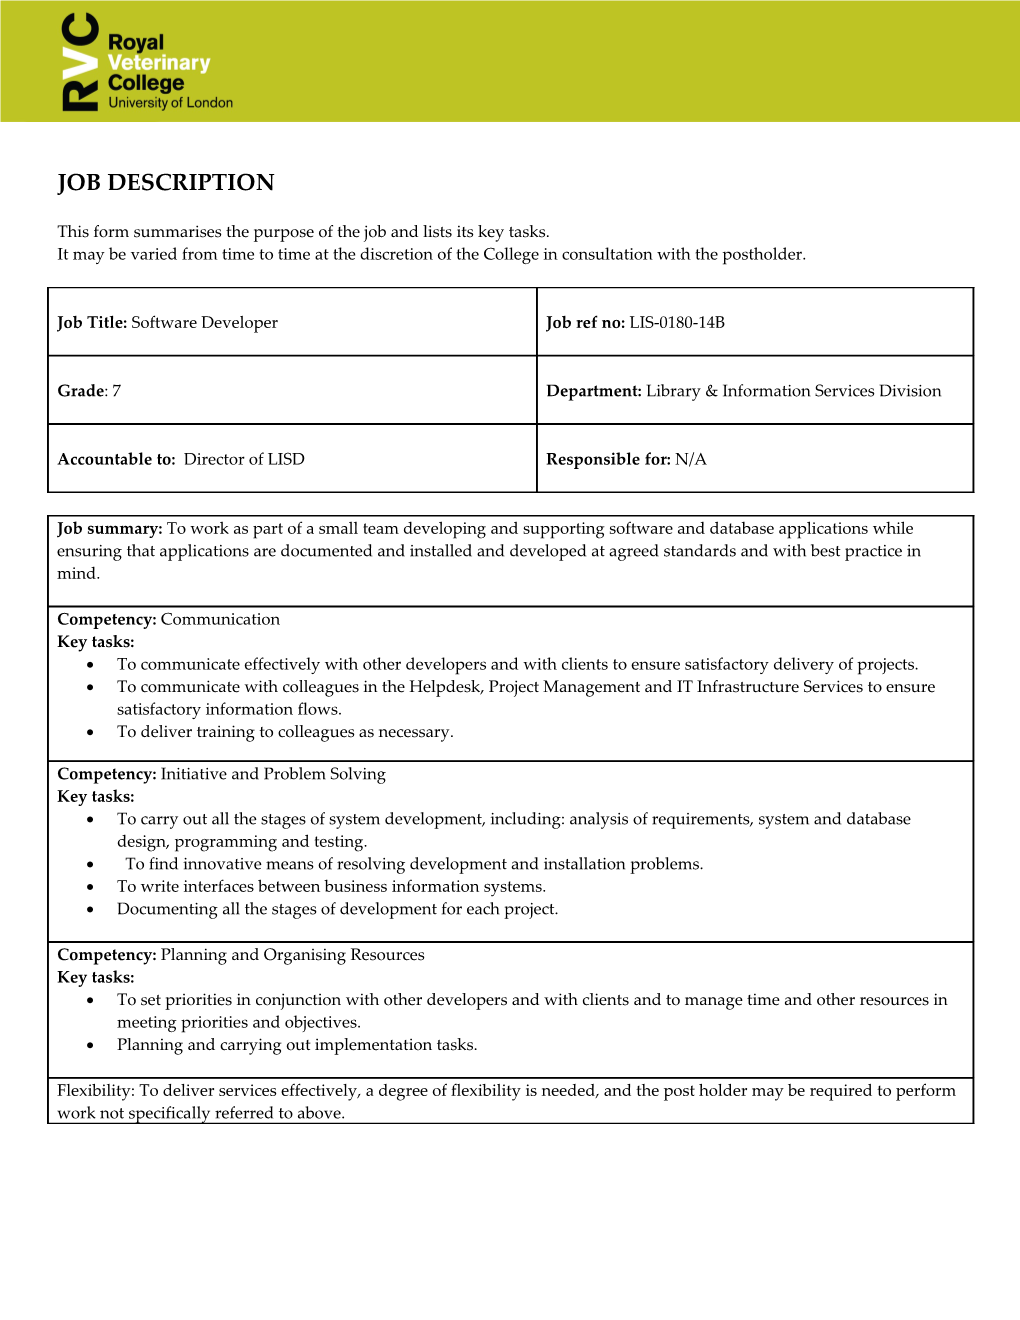 This Form Summarises the Purpose of the Job and Lists Its Key Tasks